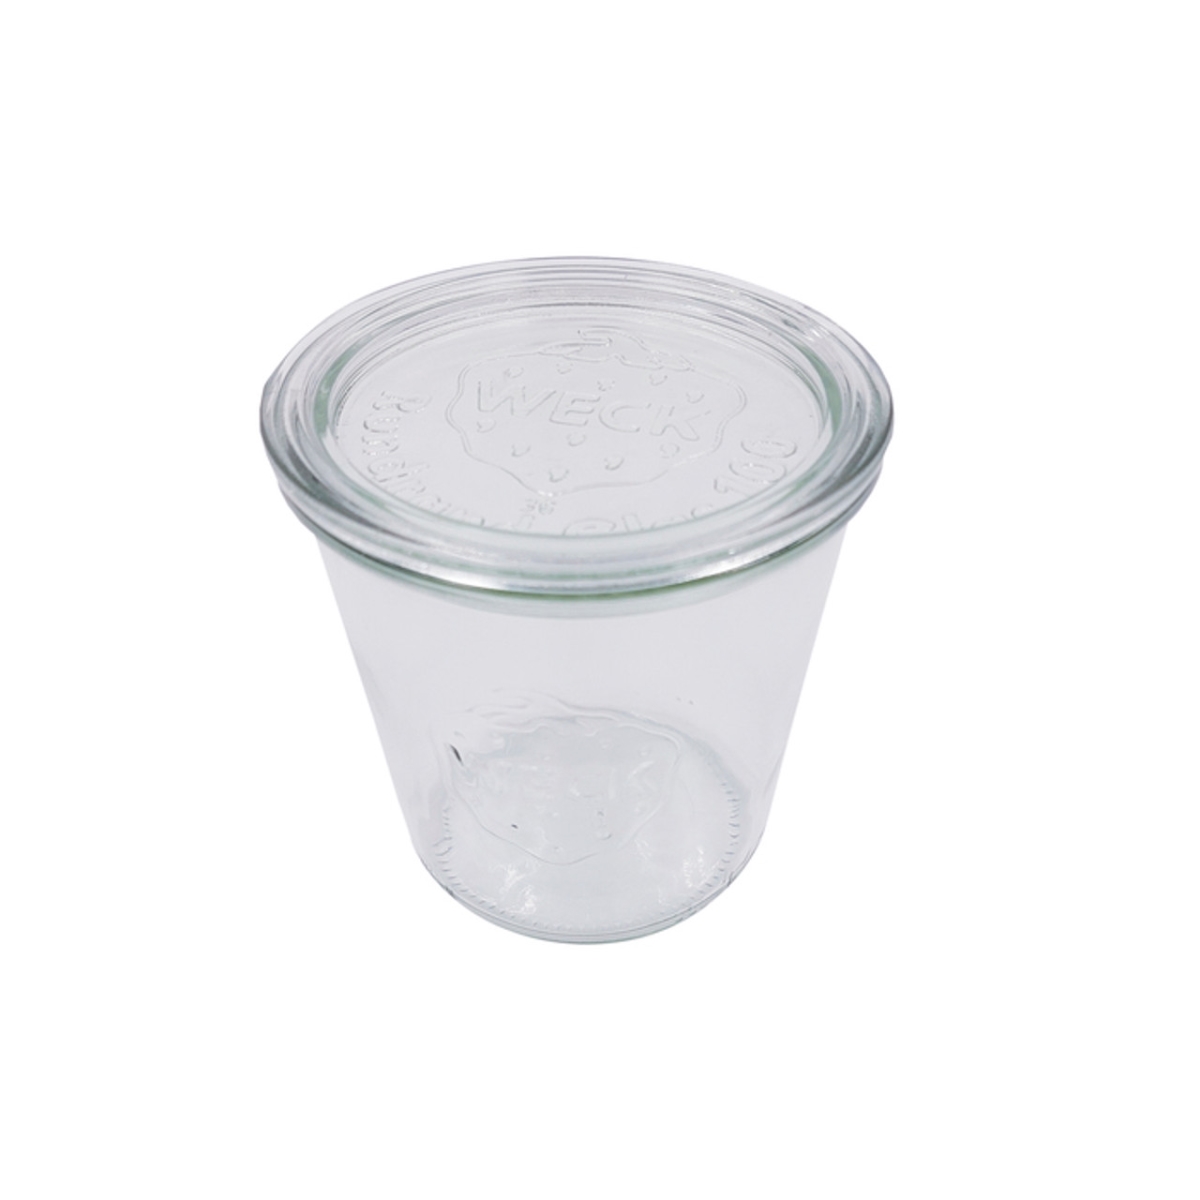 Picture of Packnwood 294WEK742 3.93 Dia. x 4.33 in. 19.6 oz Bokocook Reusable Weck Jars with Glass Lid Mold - 6 Piece